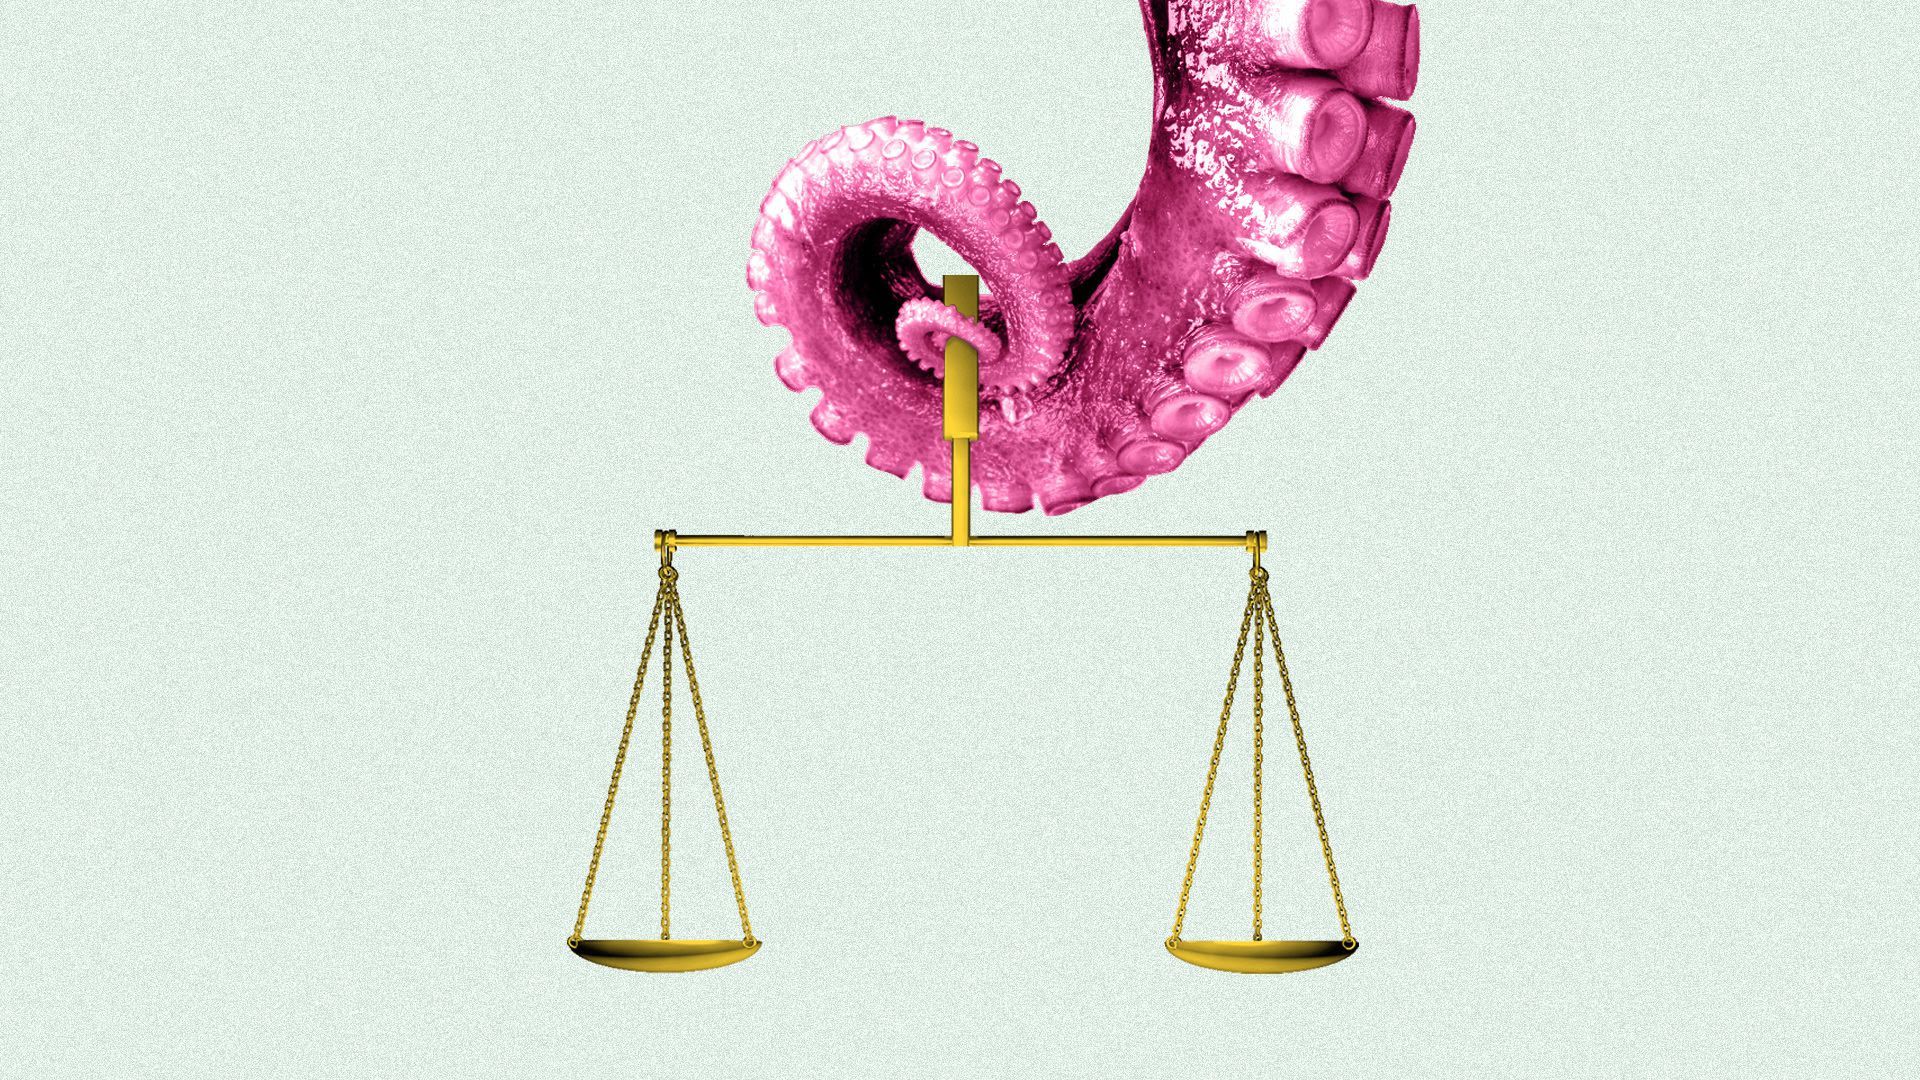 illustration of an octopus holding a scale